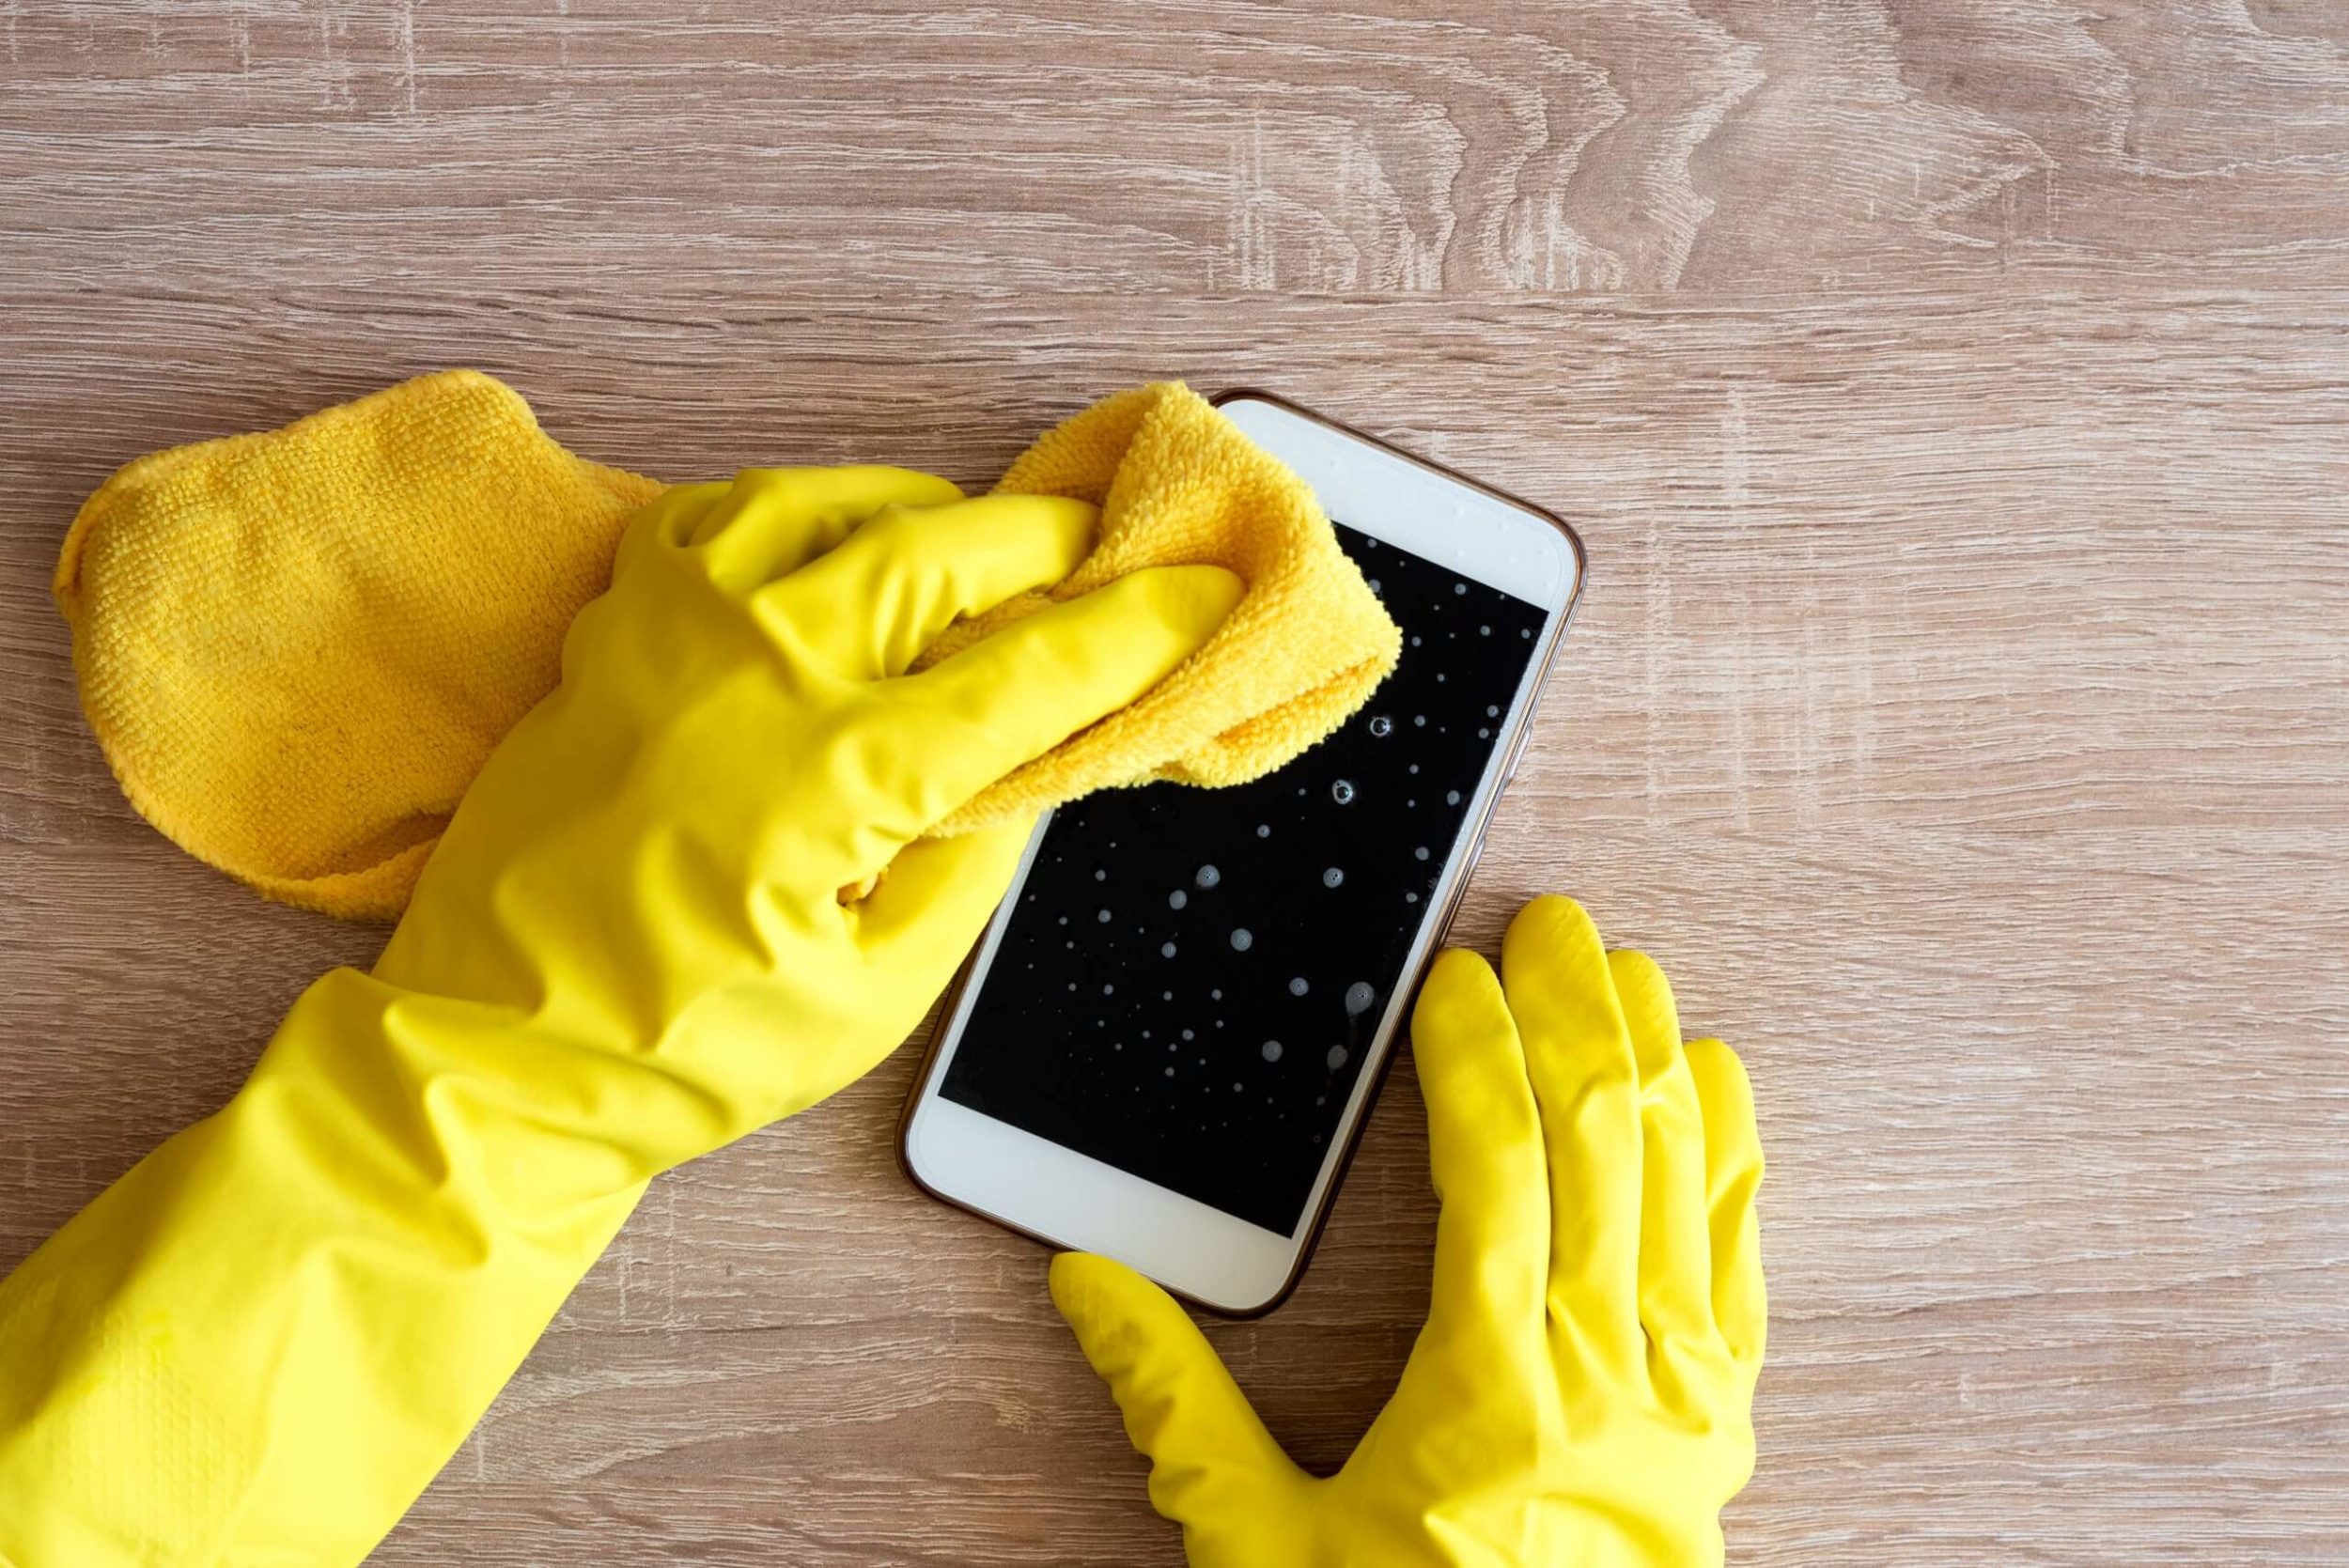 Wiping Germs Out of Our Lives: How to Properly Clean Your Electronics